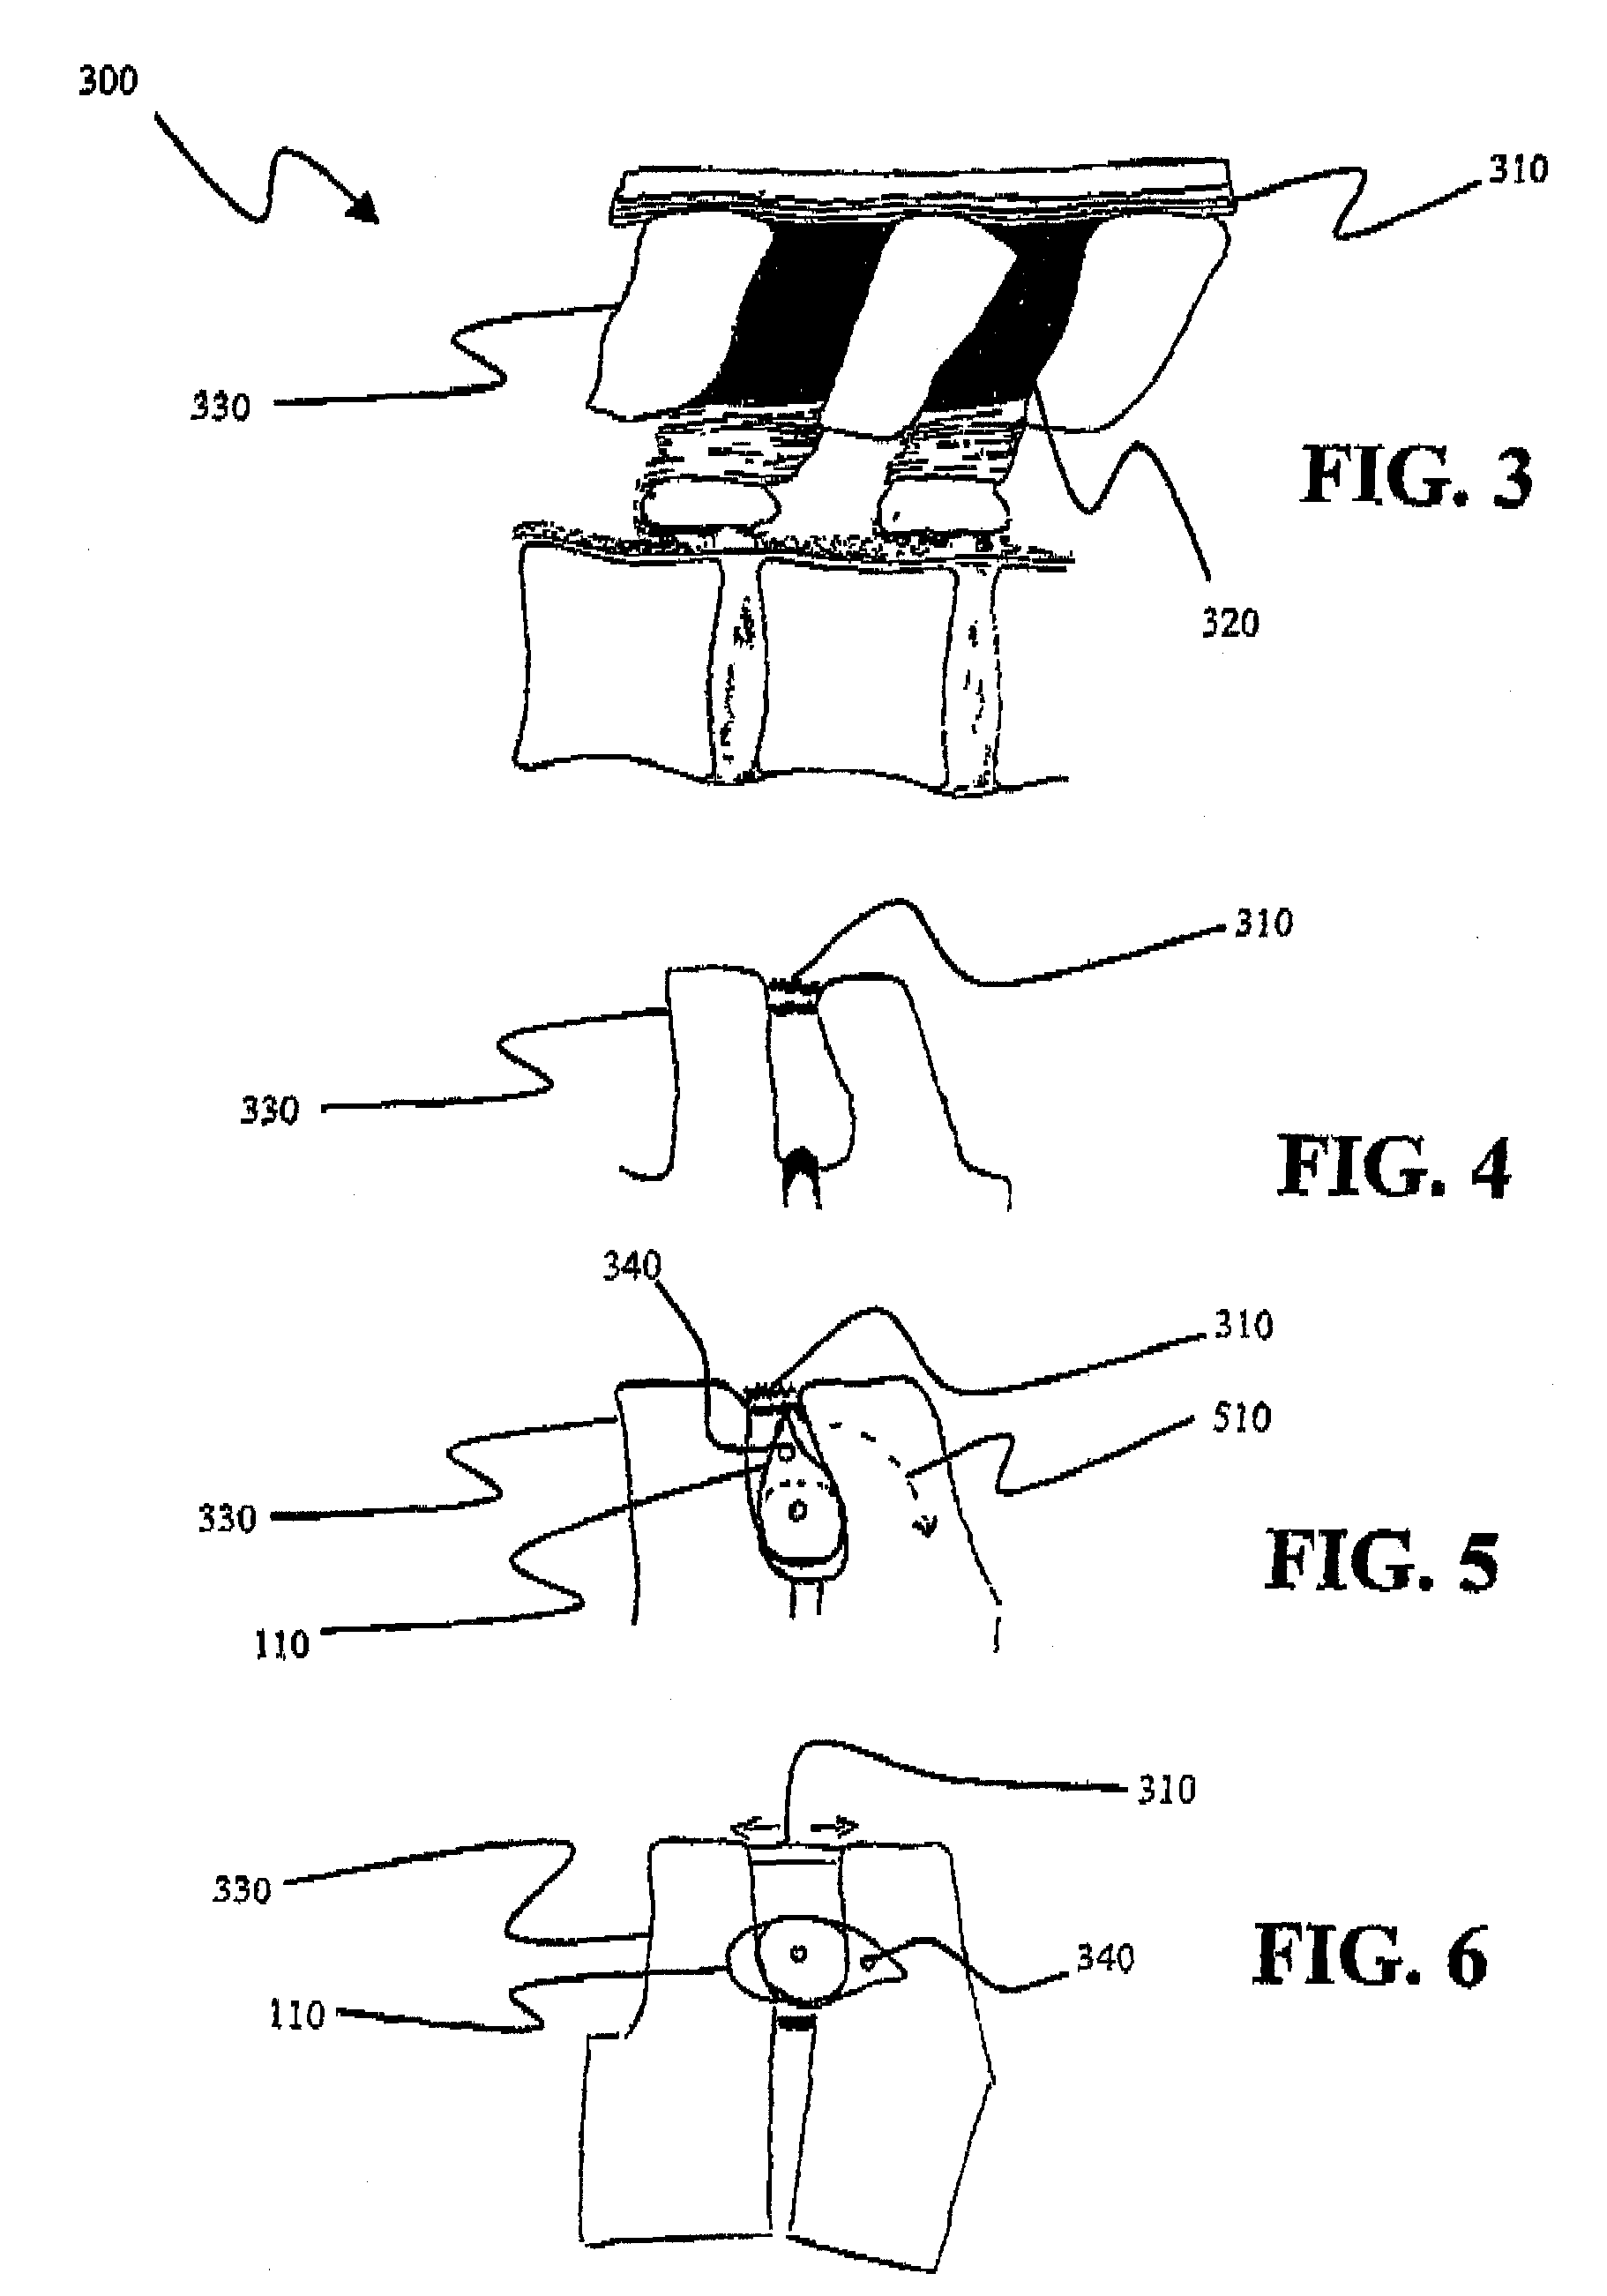 Interspinous internal fixation/distraction device